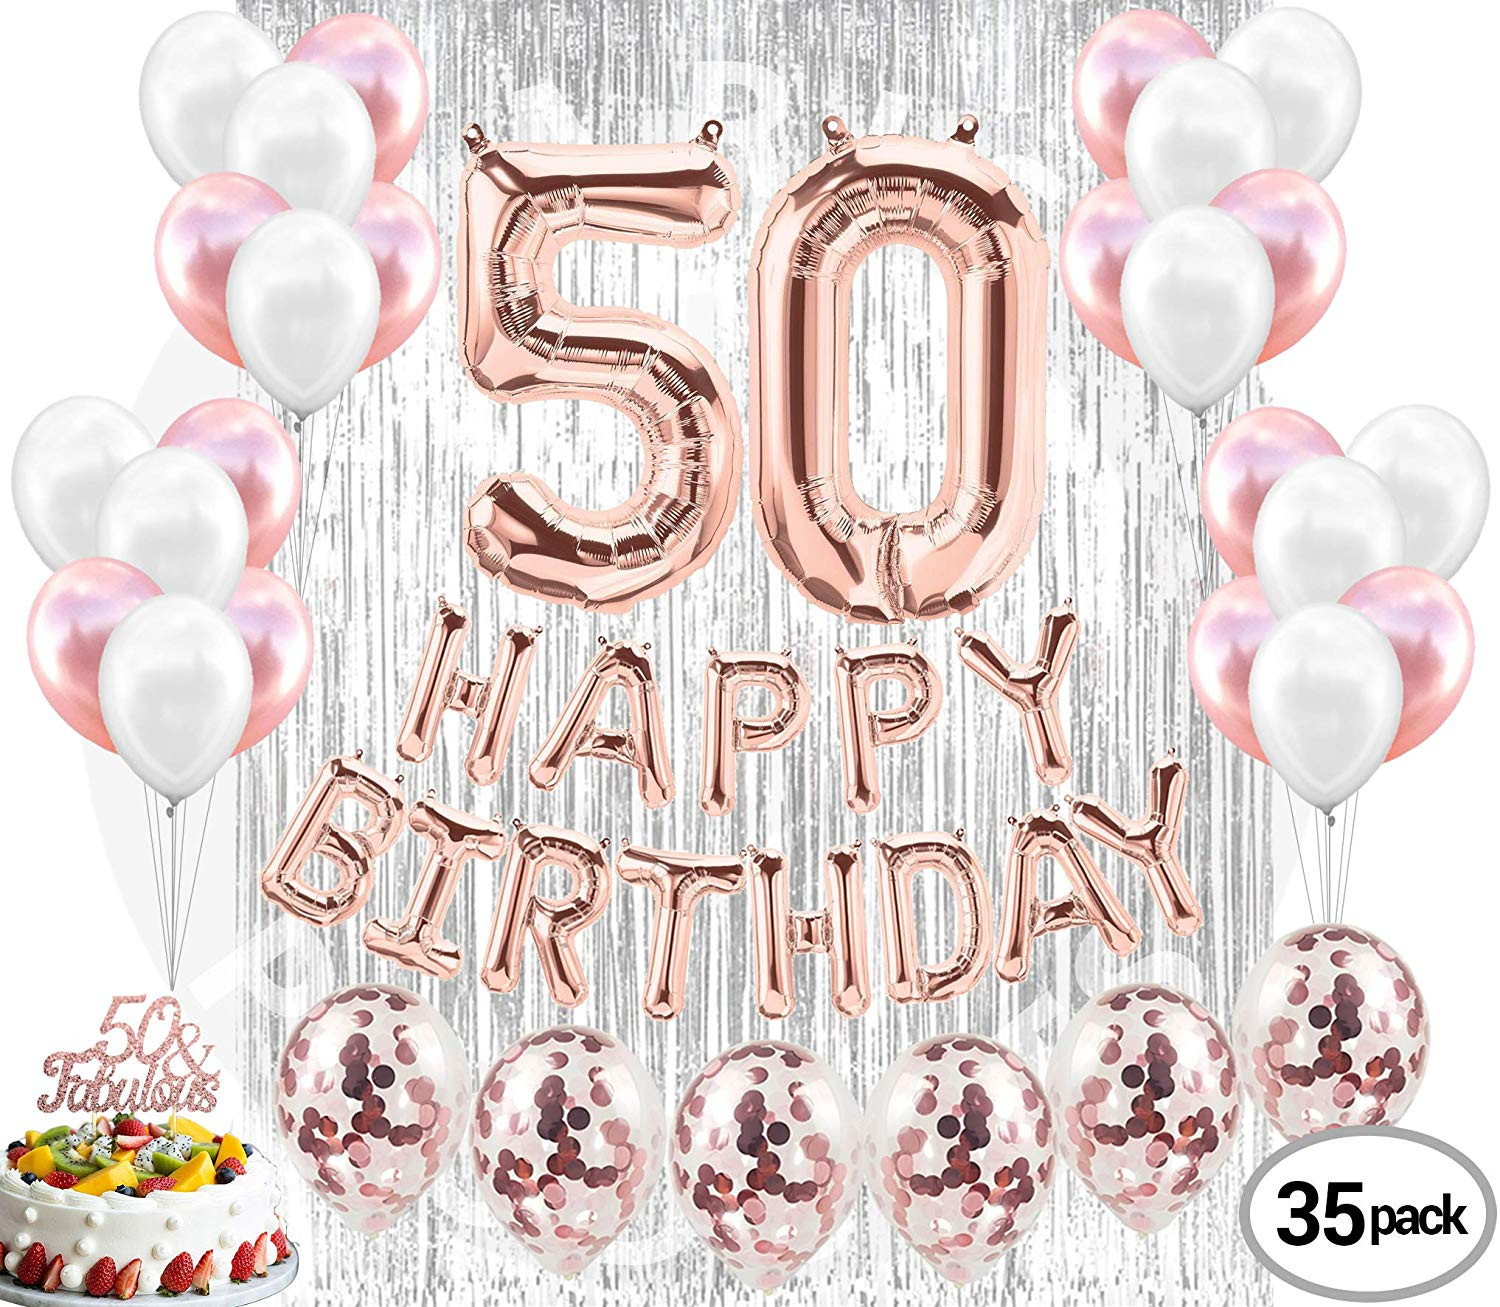 50th Birthday Party Themes For Her
 Buy 50th Birthday Cake Topper With Glitter Gold Dress and